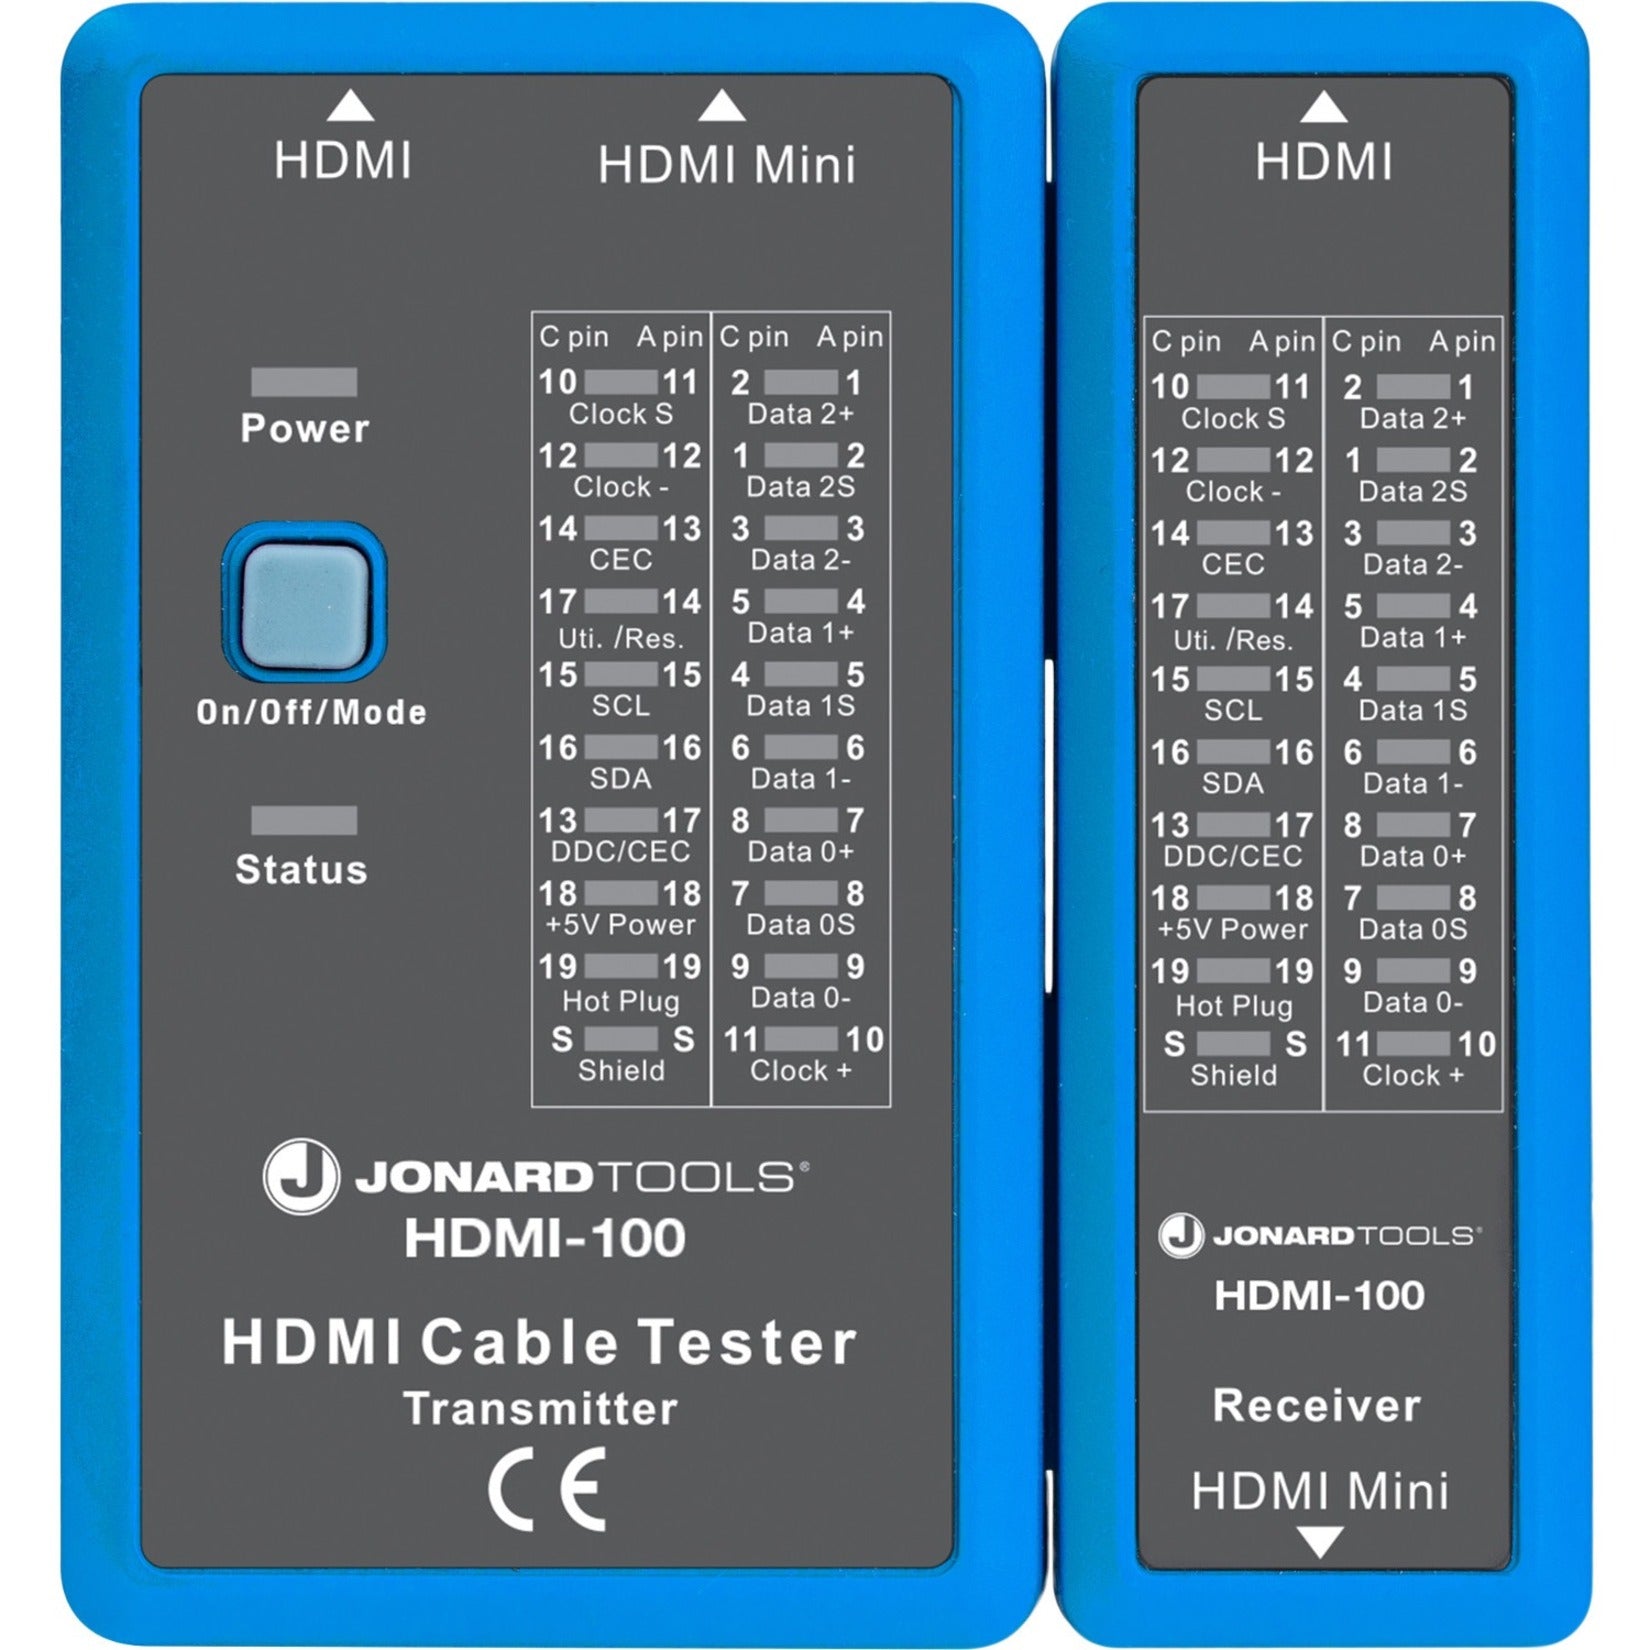 Jonard Tools HDMI-100 HDMI Cable Tester, Test and Troubleshoot HDMI Cables with Ease